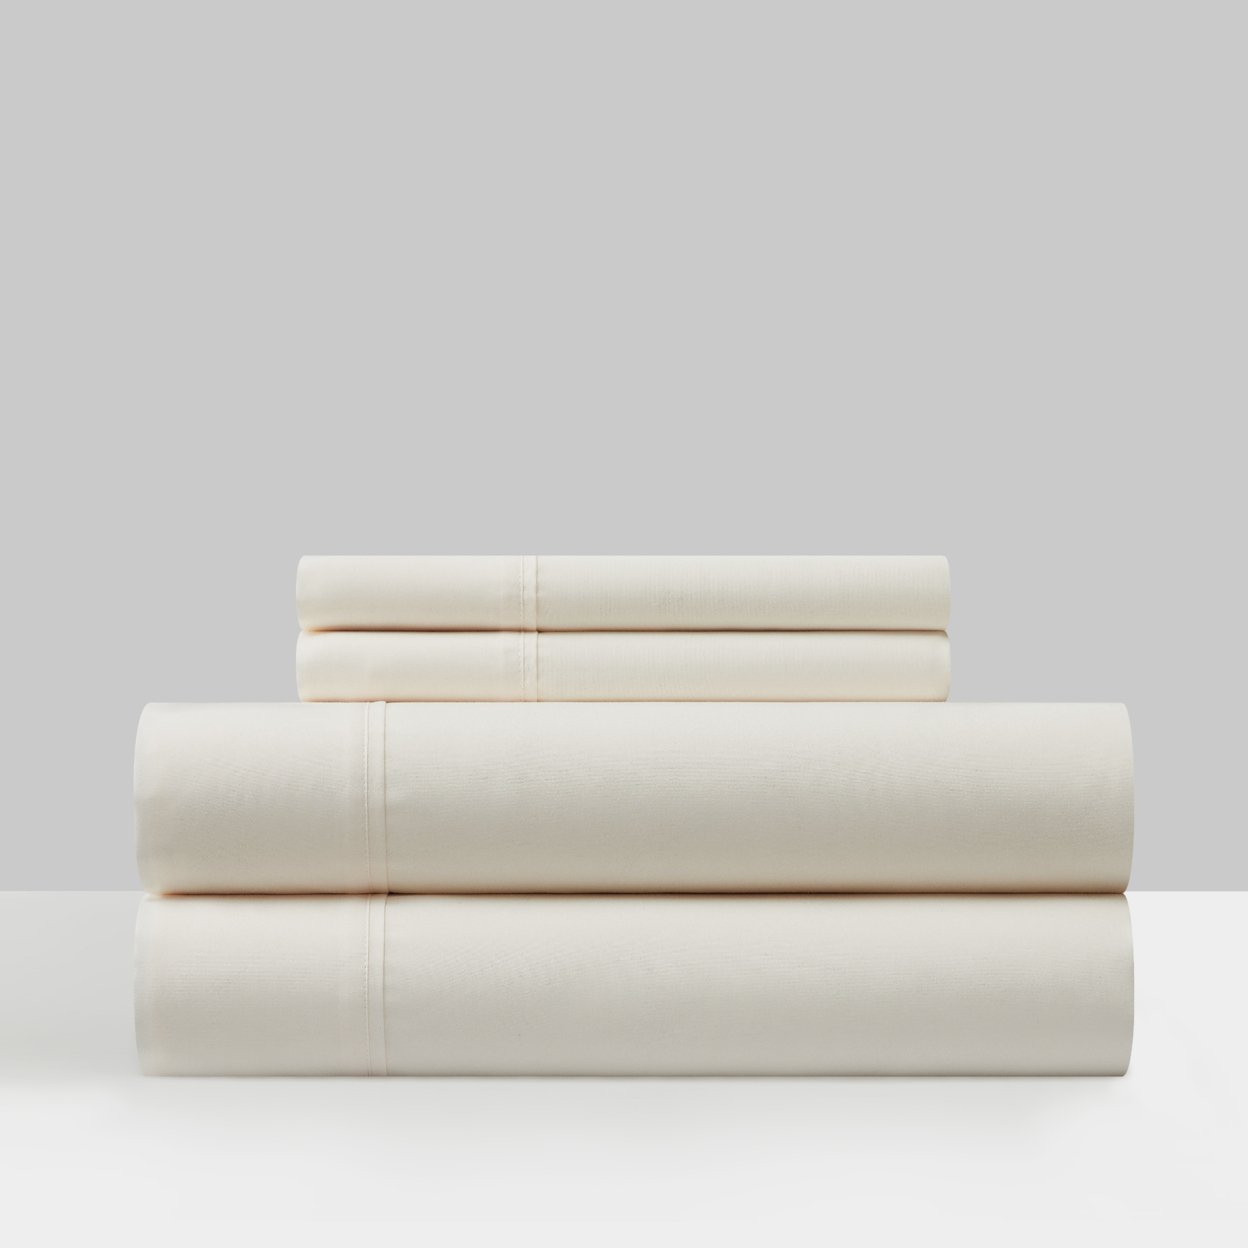 Shton 3 Or 4 Piece Sheet Set Super Soft Solid Color With Piping Flange Edge - Beige, Queen